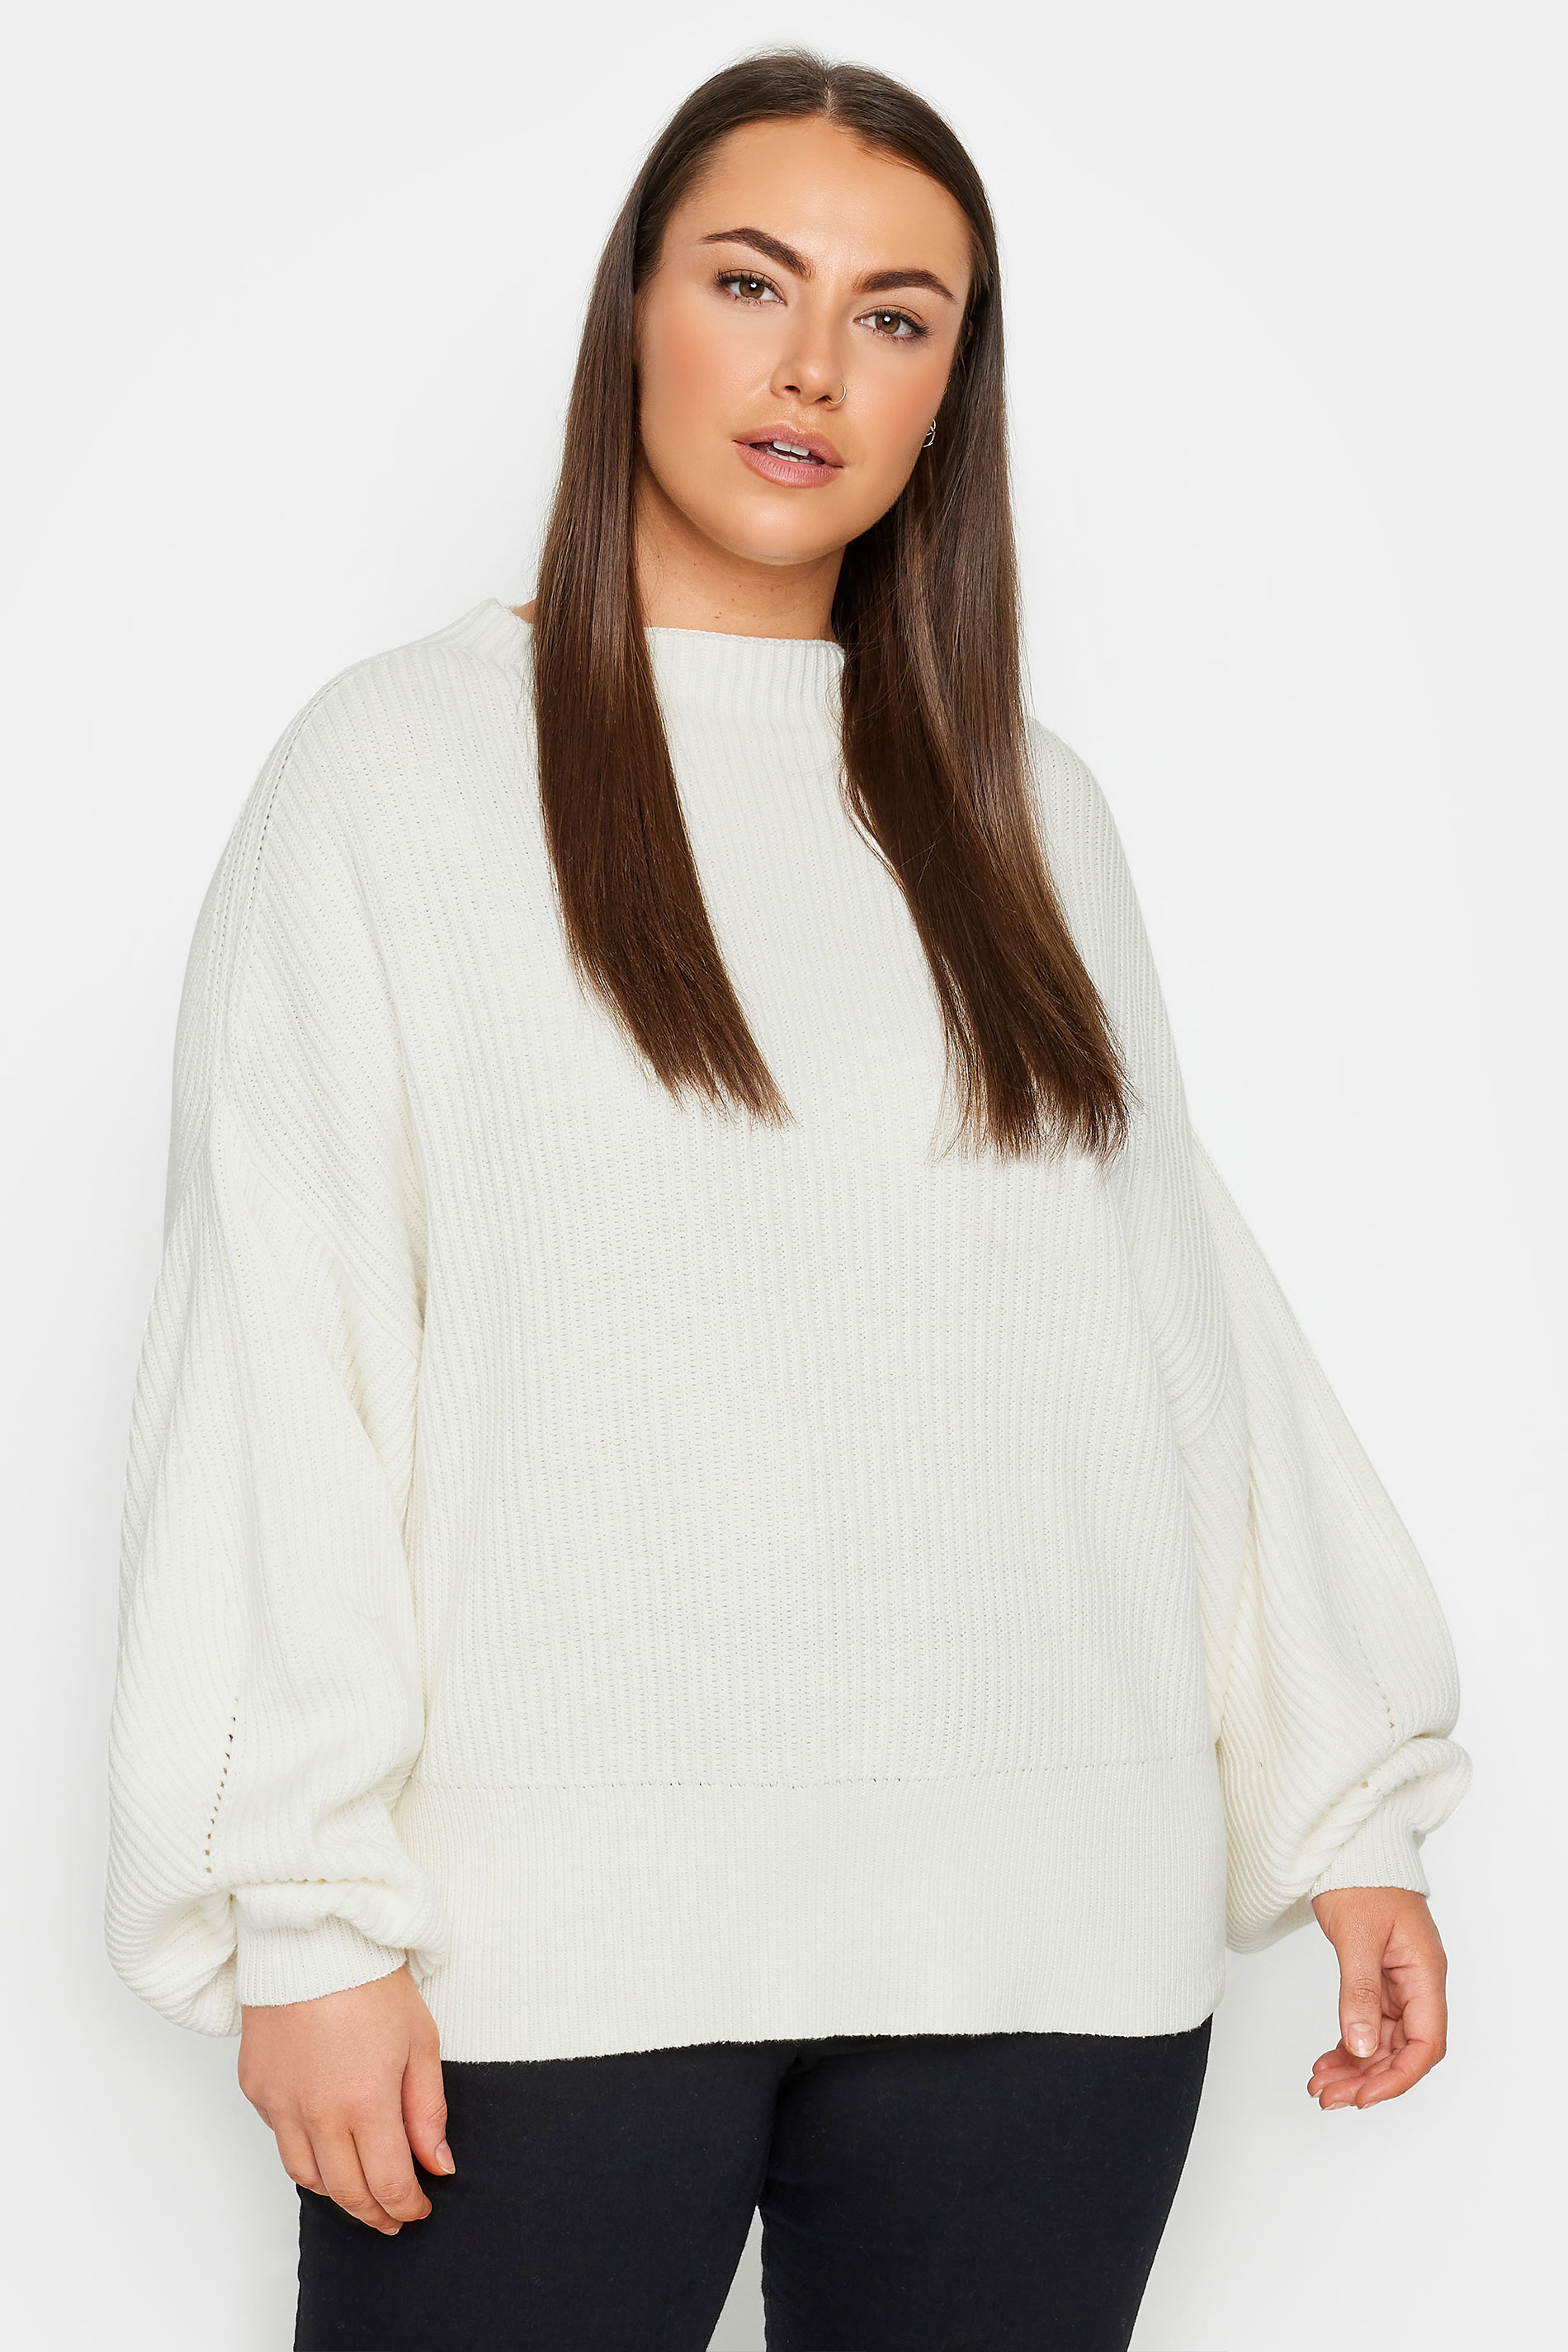 City Chic Ivory White Balloon Sleeve Knitted Jumper | Evans 1